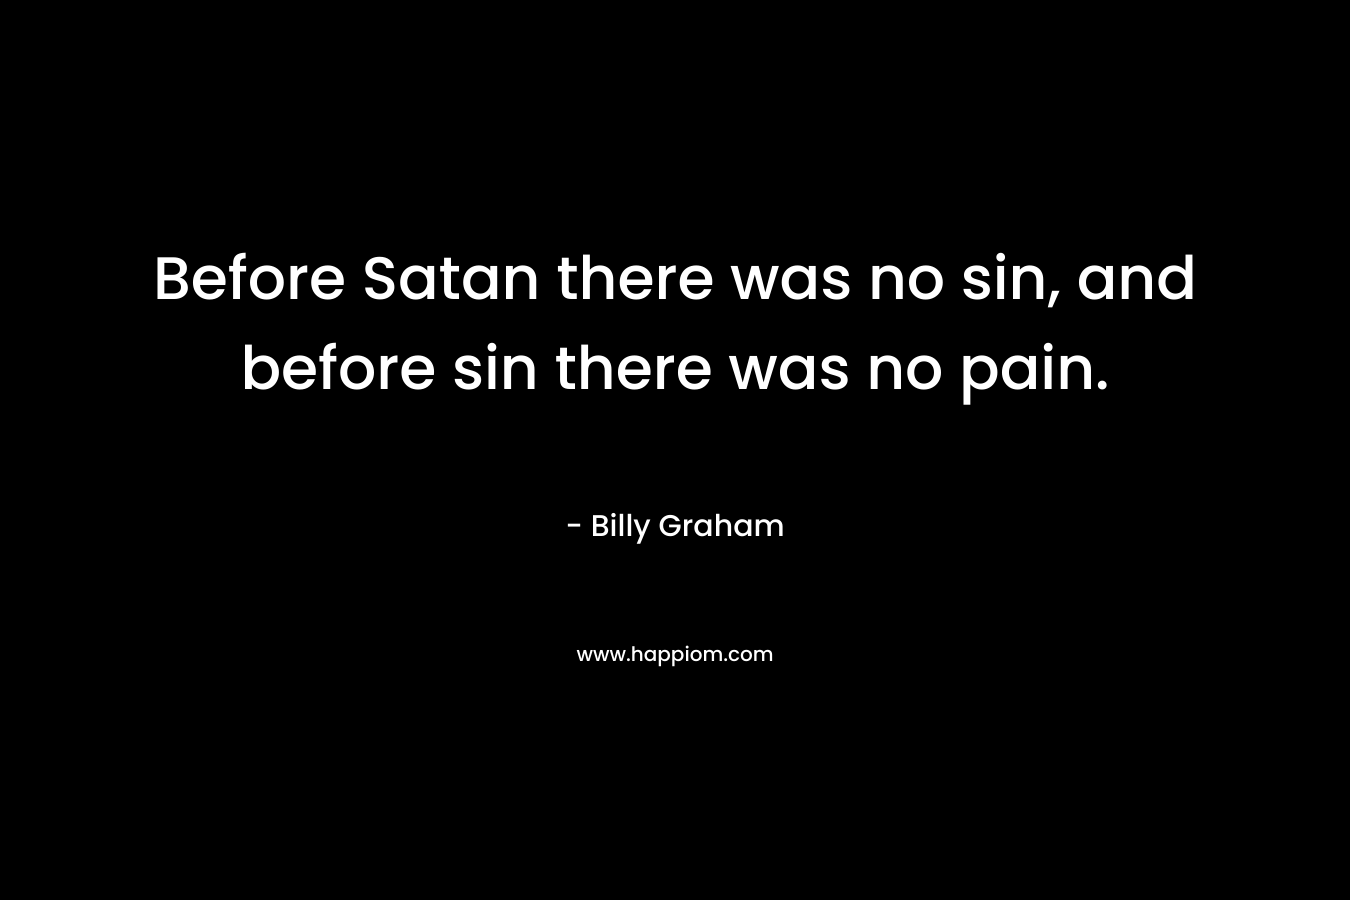 Before Satan there was no sin, and before sin there was no pain.